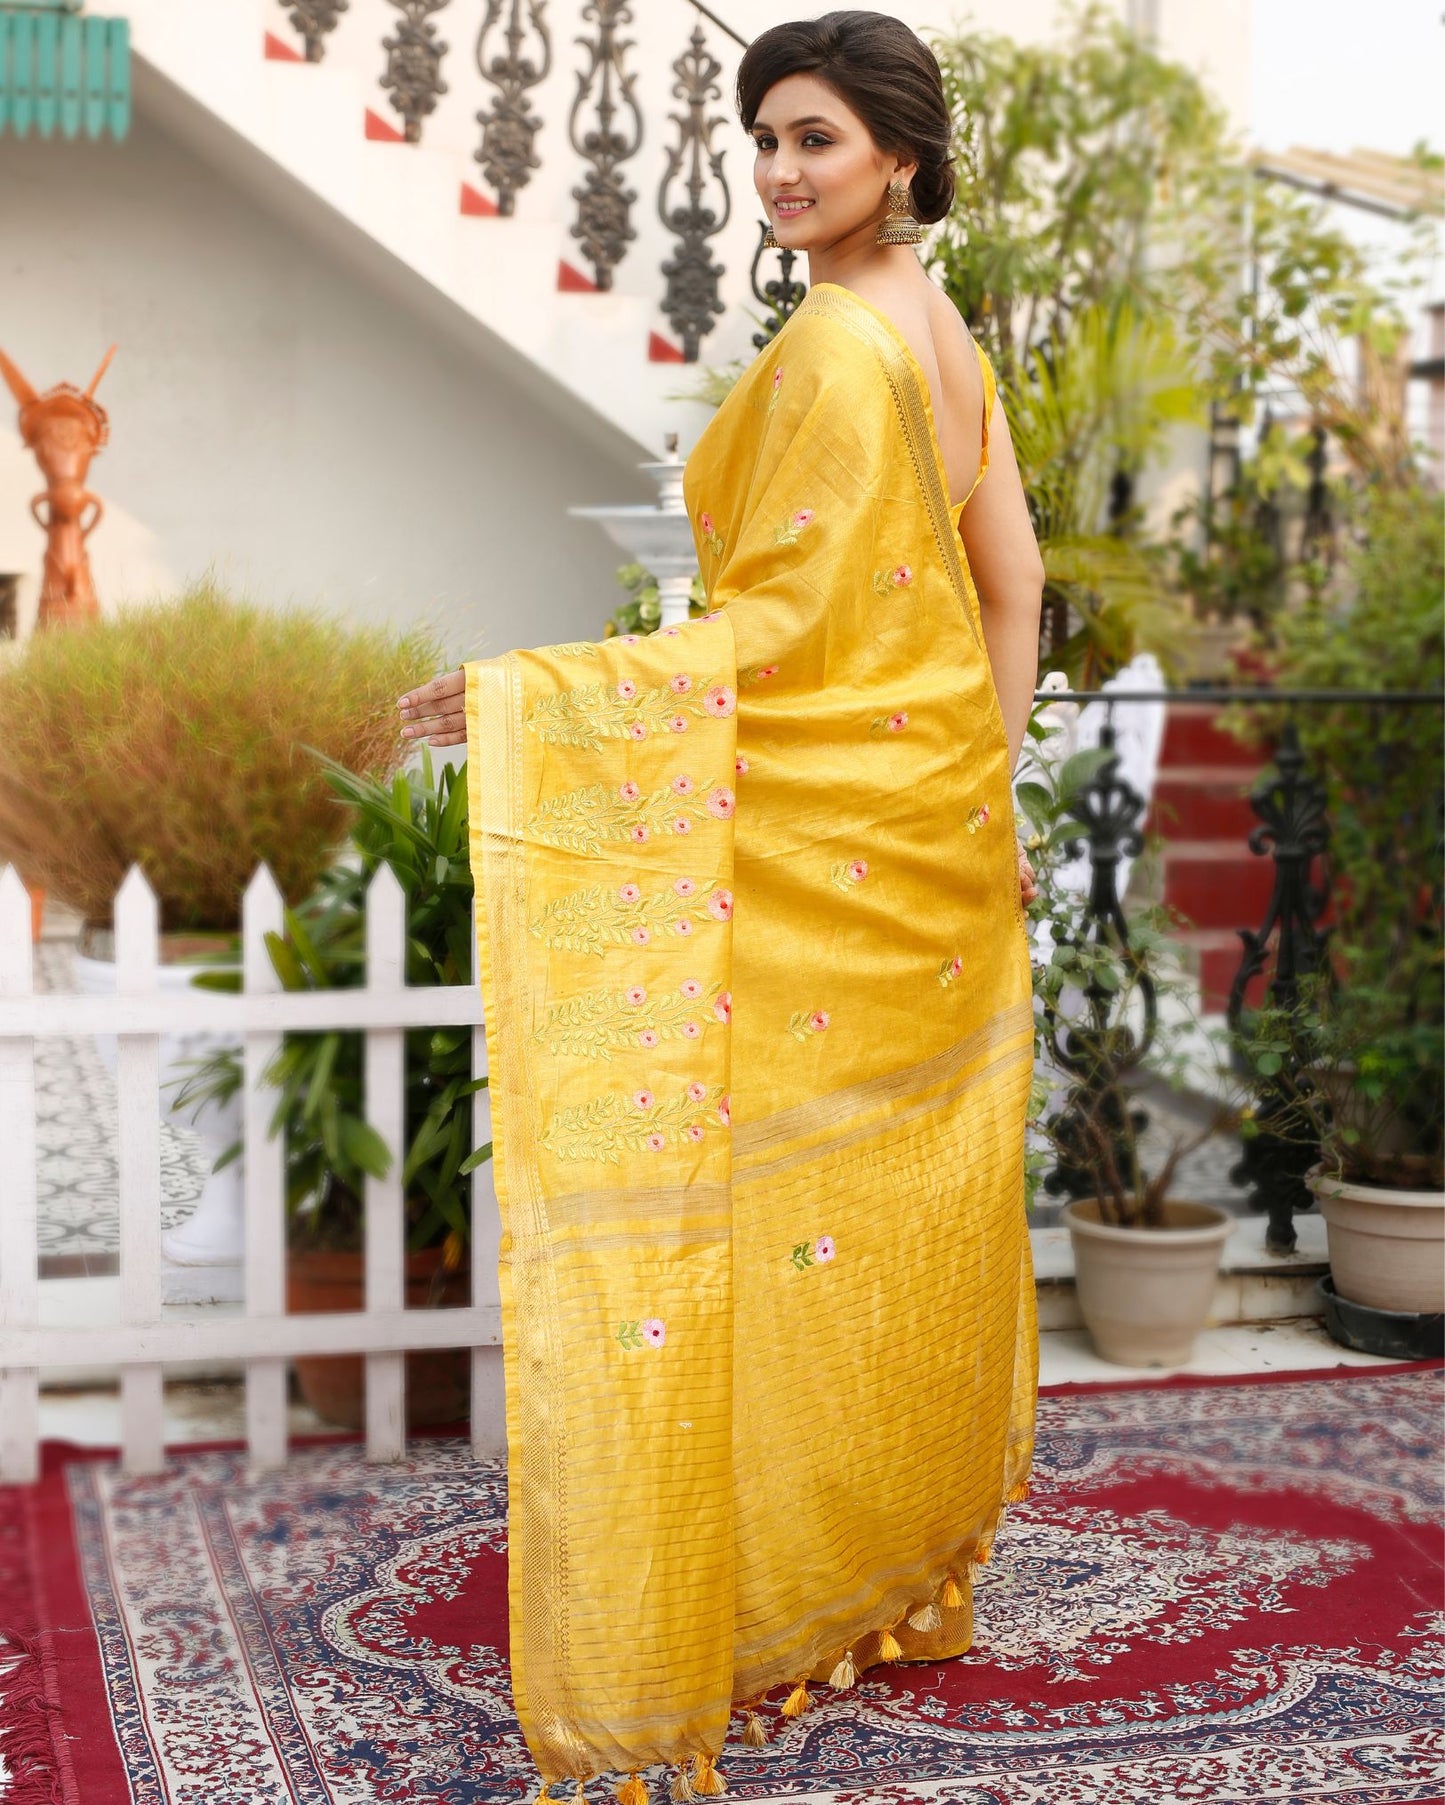 9227-Silk Linen Embroidered Handloom Mustard Yellow Saree with Blouse